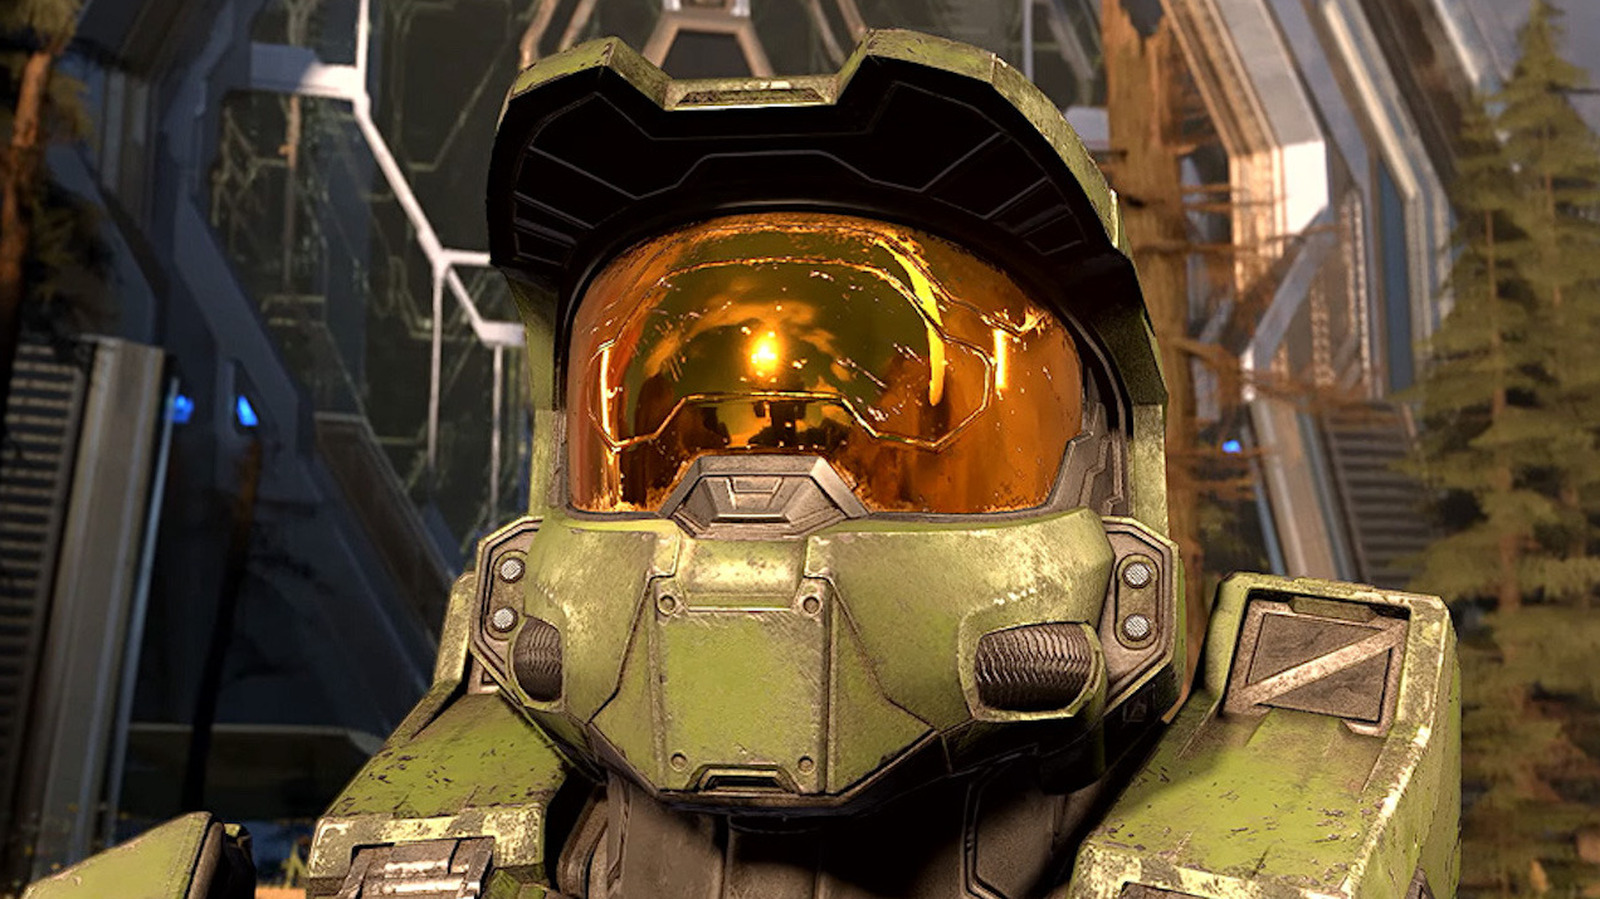 How long is the Halo Infinite campaign?